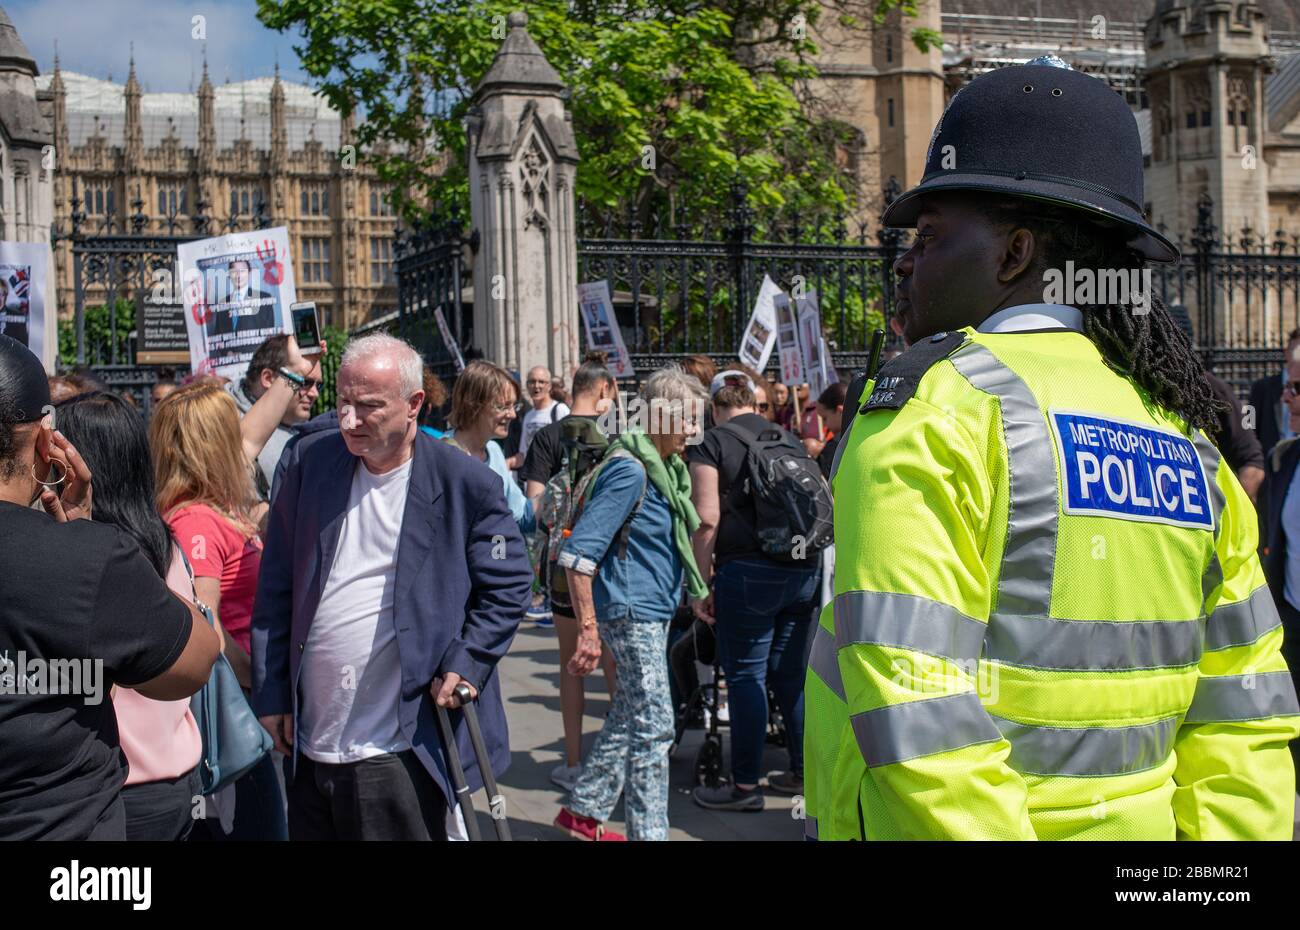 Police officer watches from a distance, as a 'Operation Shutdown' protest demonstration takes place at the gates to the House of Parliament in London. Stock Photo